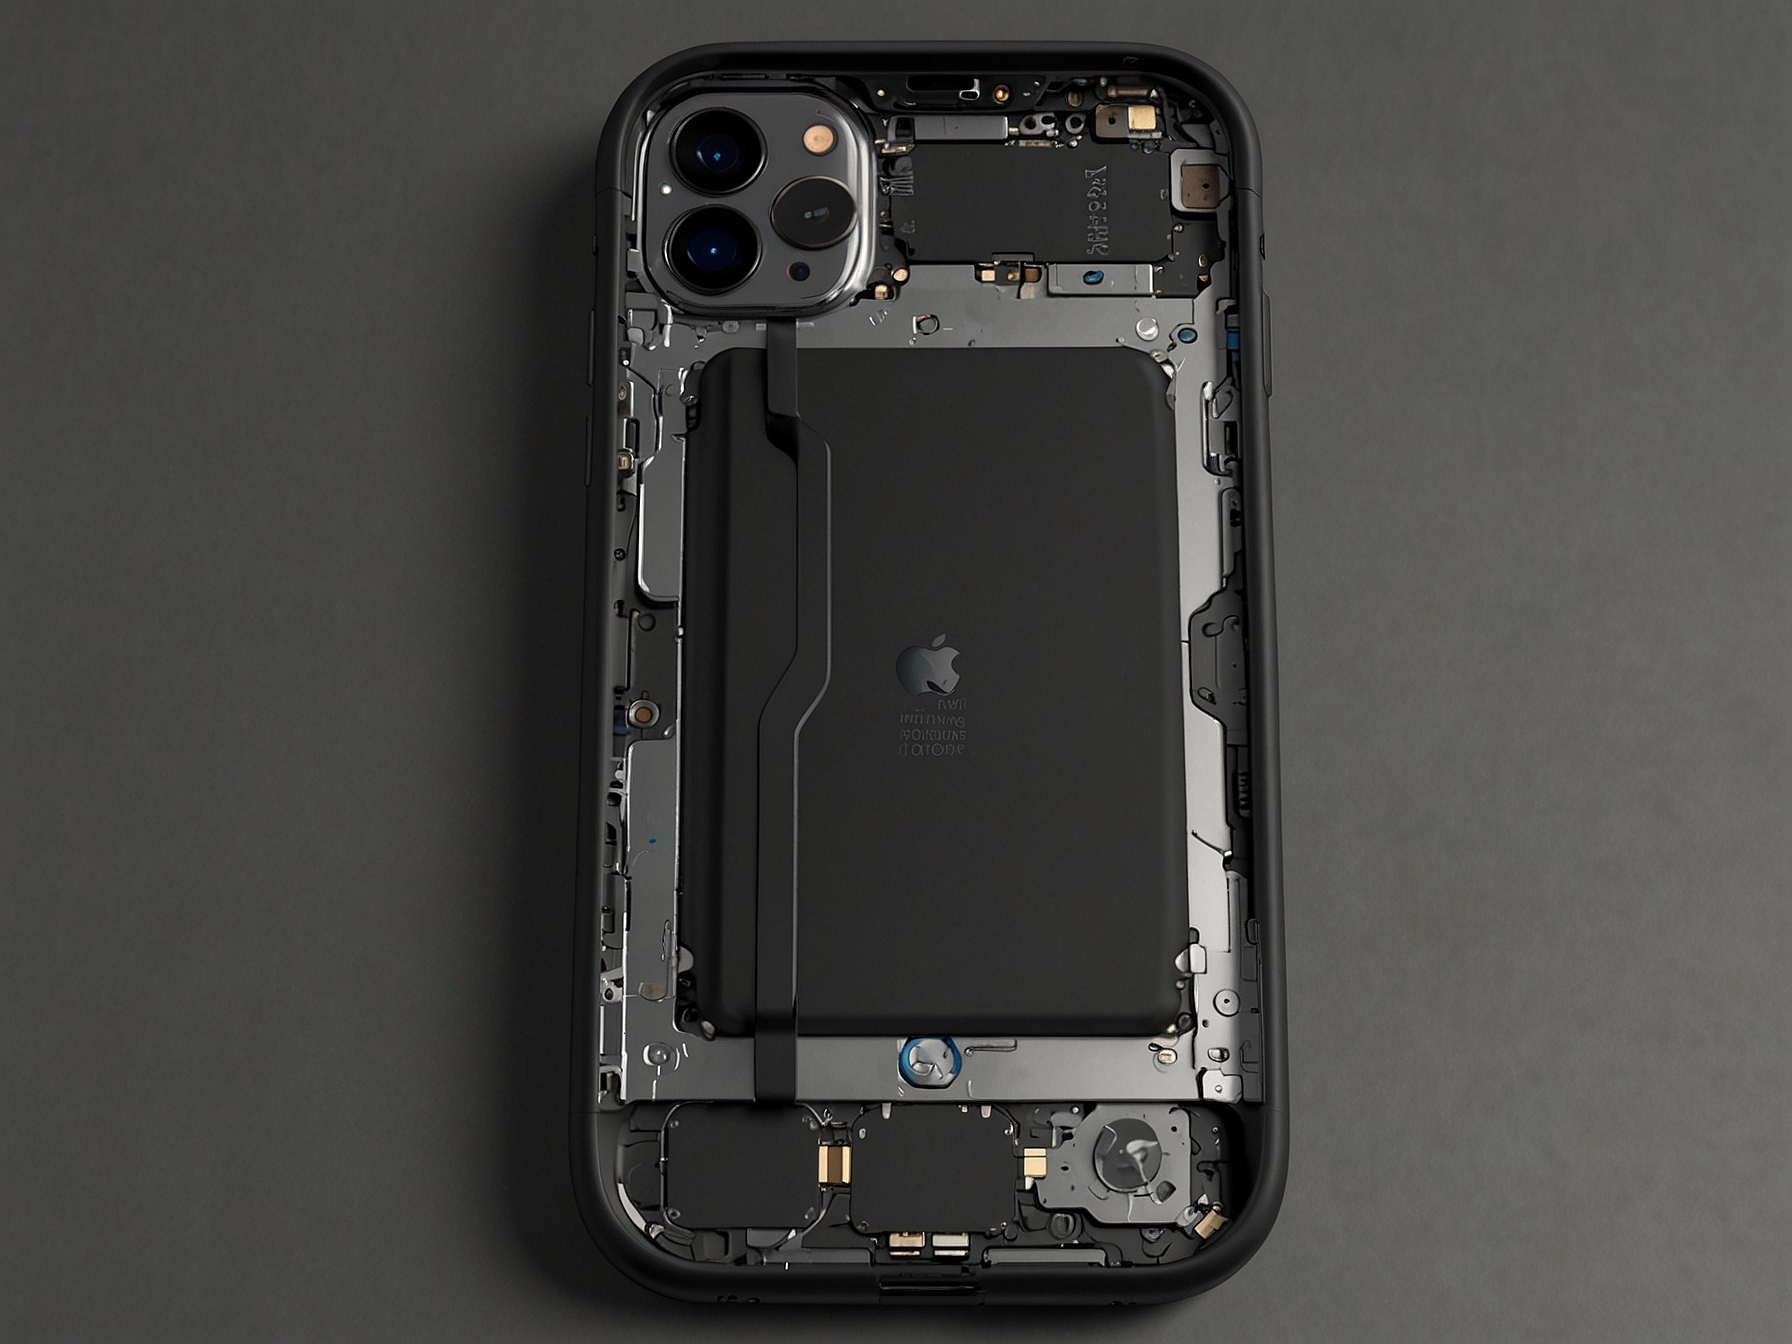 An illustration of an iPhone 16 with a modular design, showcasing how the battery compartment can be easily accessed with standard tools, highlighting the new user-friendly feature.